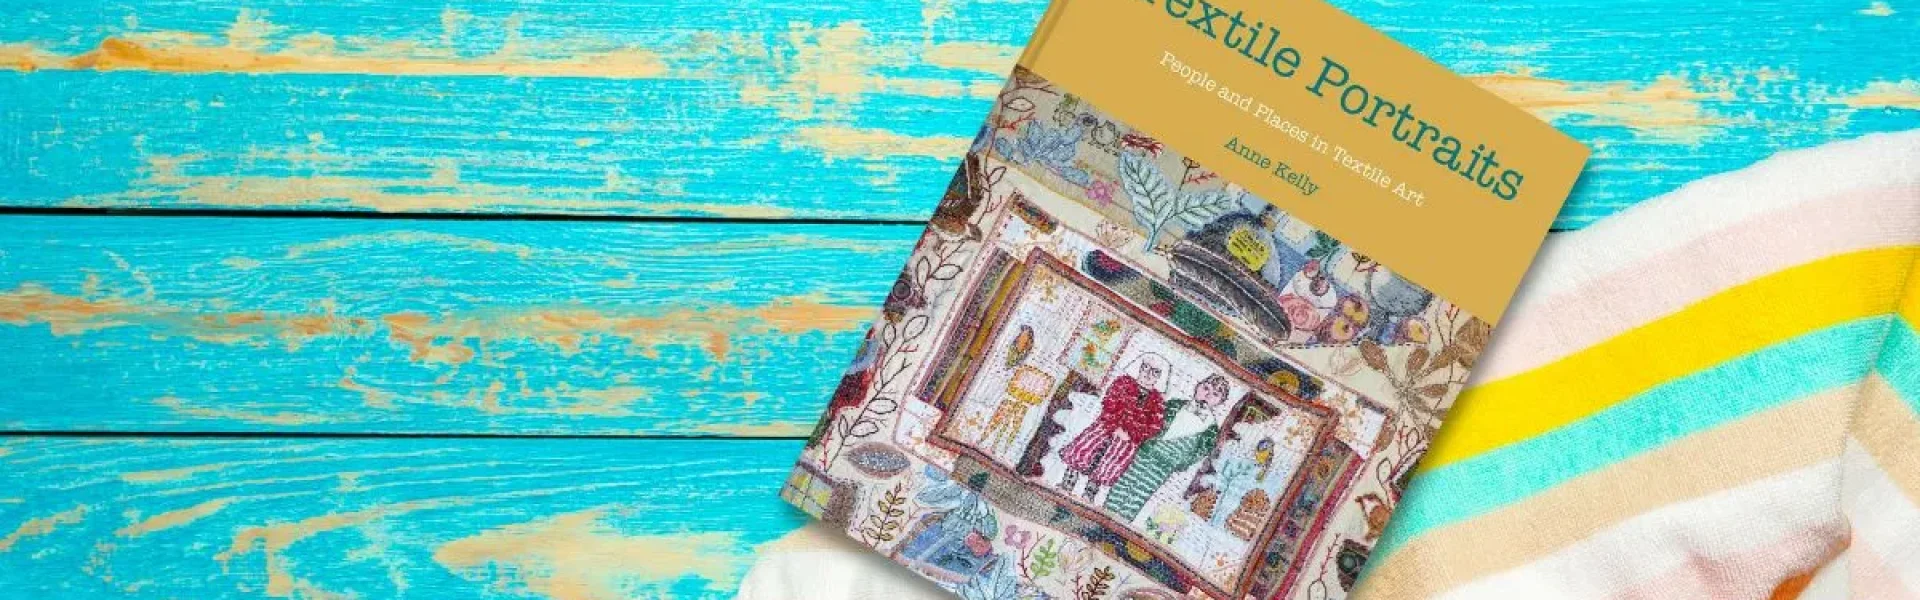 Latest book releases for textile enthusiasts this summer